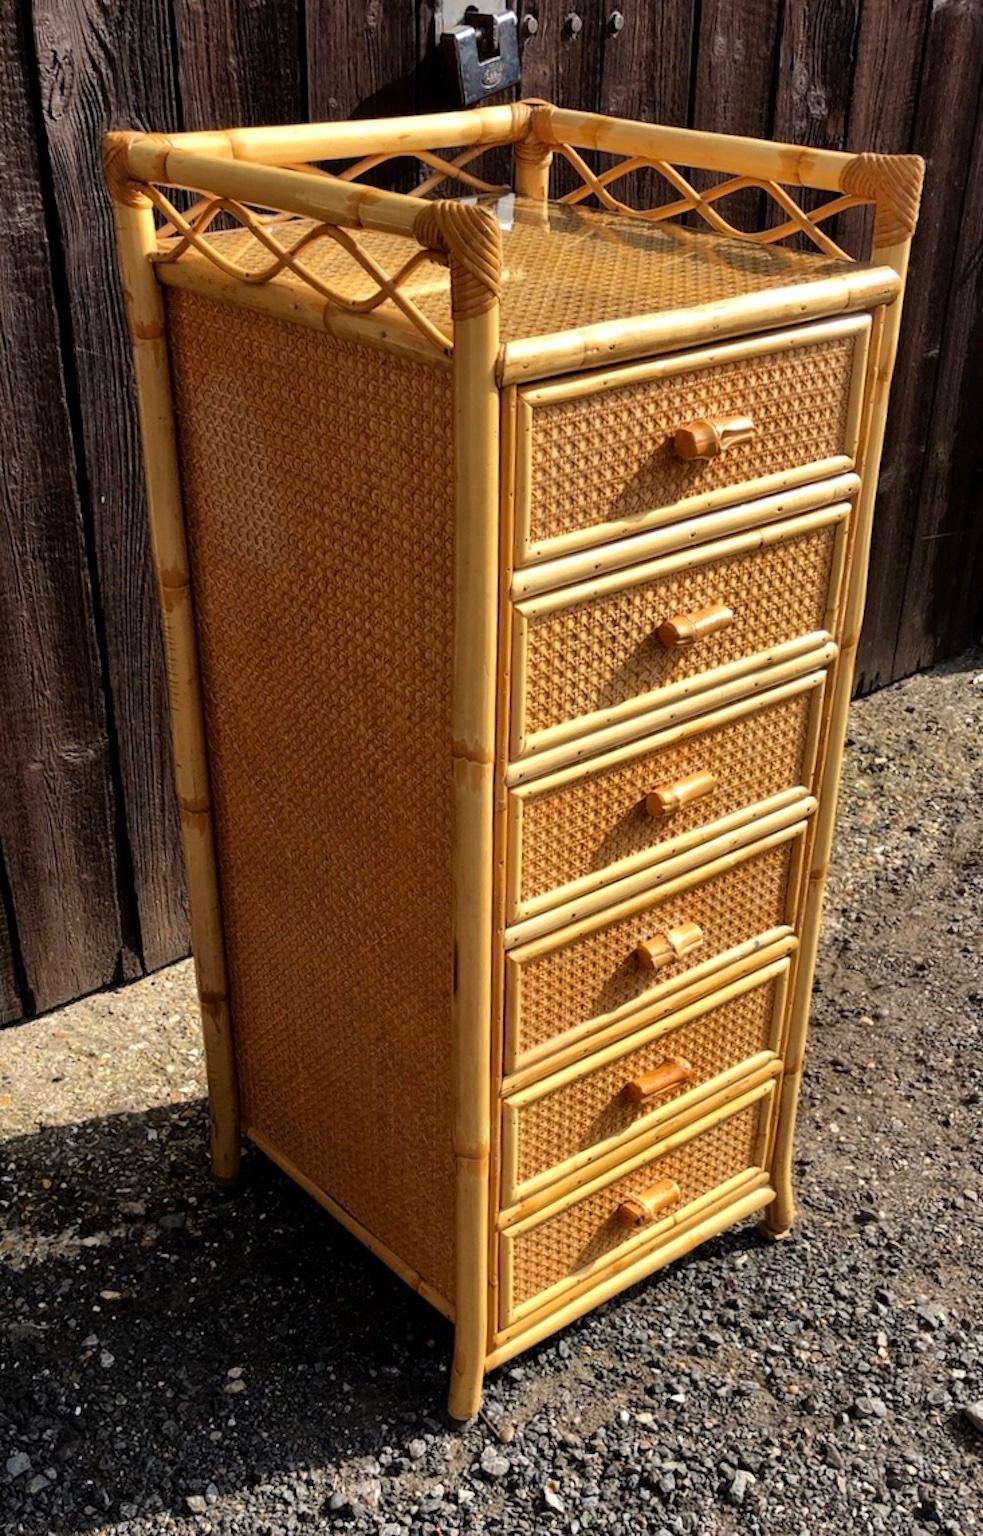 Midcentury rattan / bamboo highboy / tallboy, chest of drawers by Angraves, England, 1970s

This is a beautiful, natural in color rattan Tallboy. Made by English company ‘Angraves’ of Brook St, Leicester, part of their “Invincible” range.

The